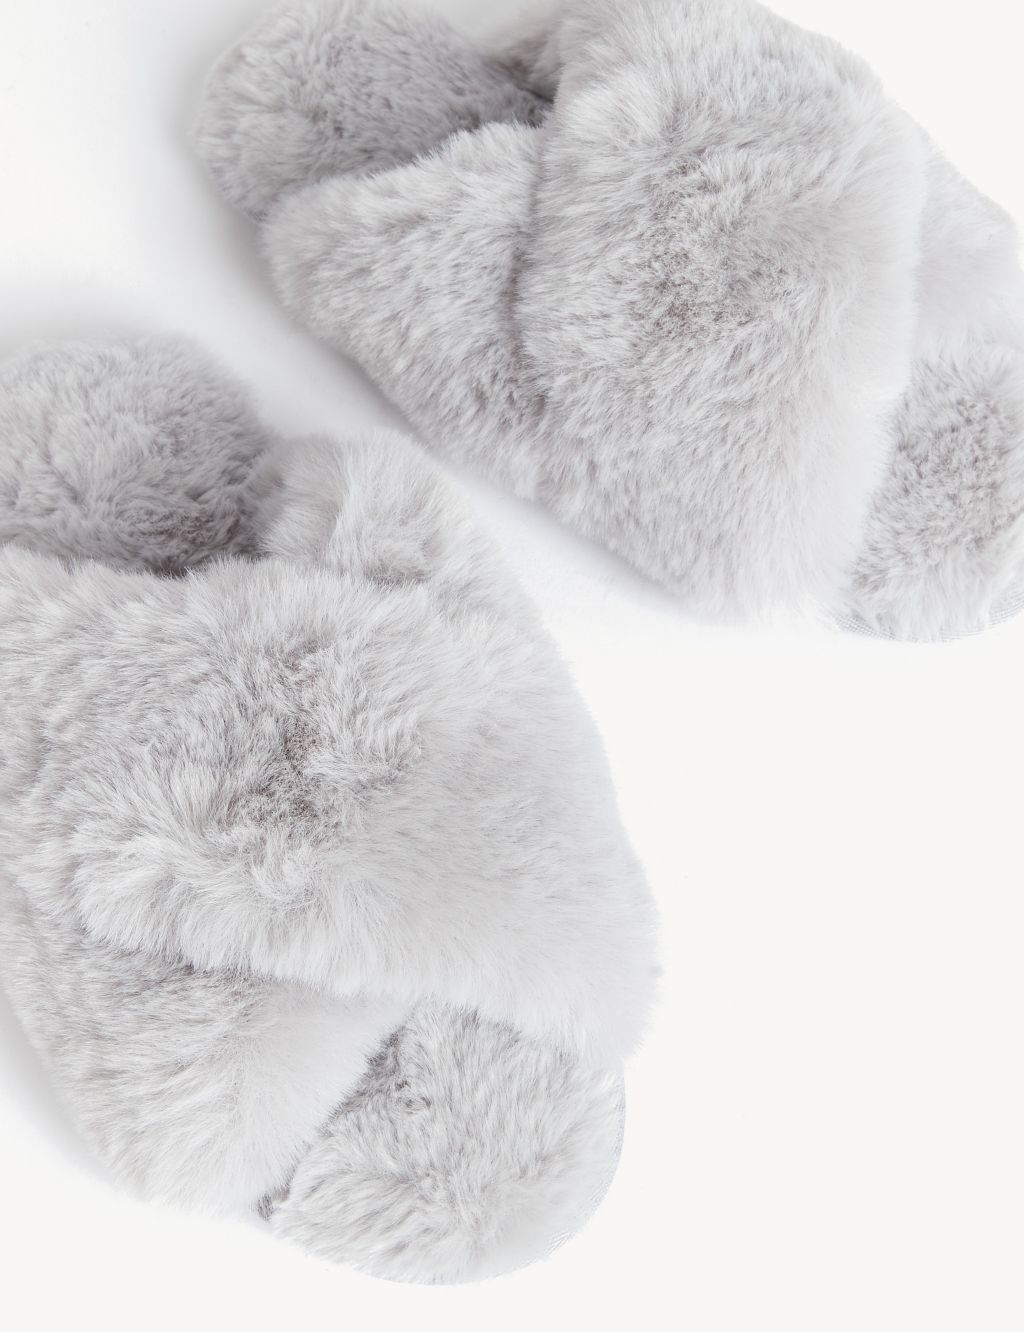 Faux Fur Crossover Slider Slippers image 3